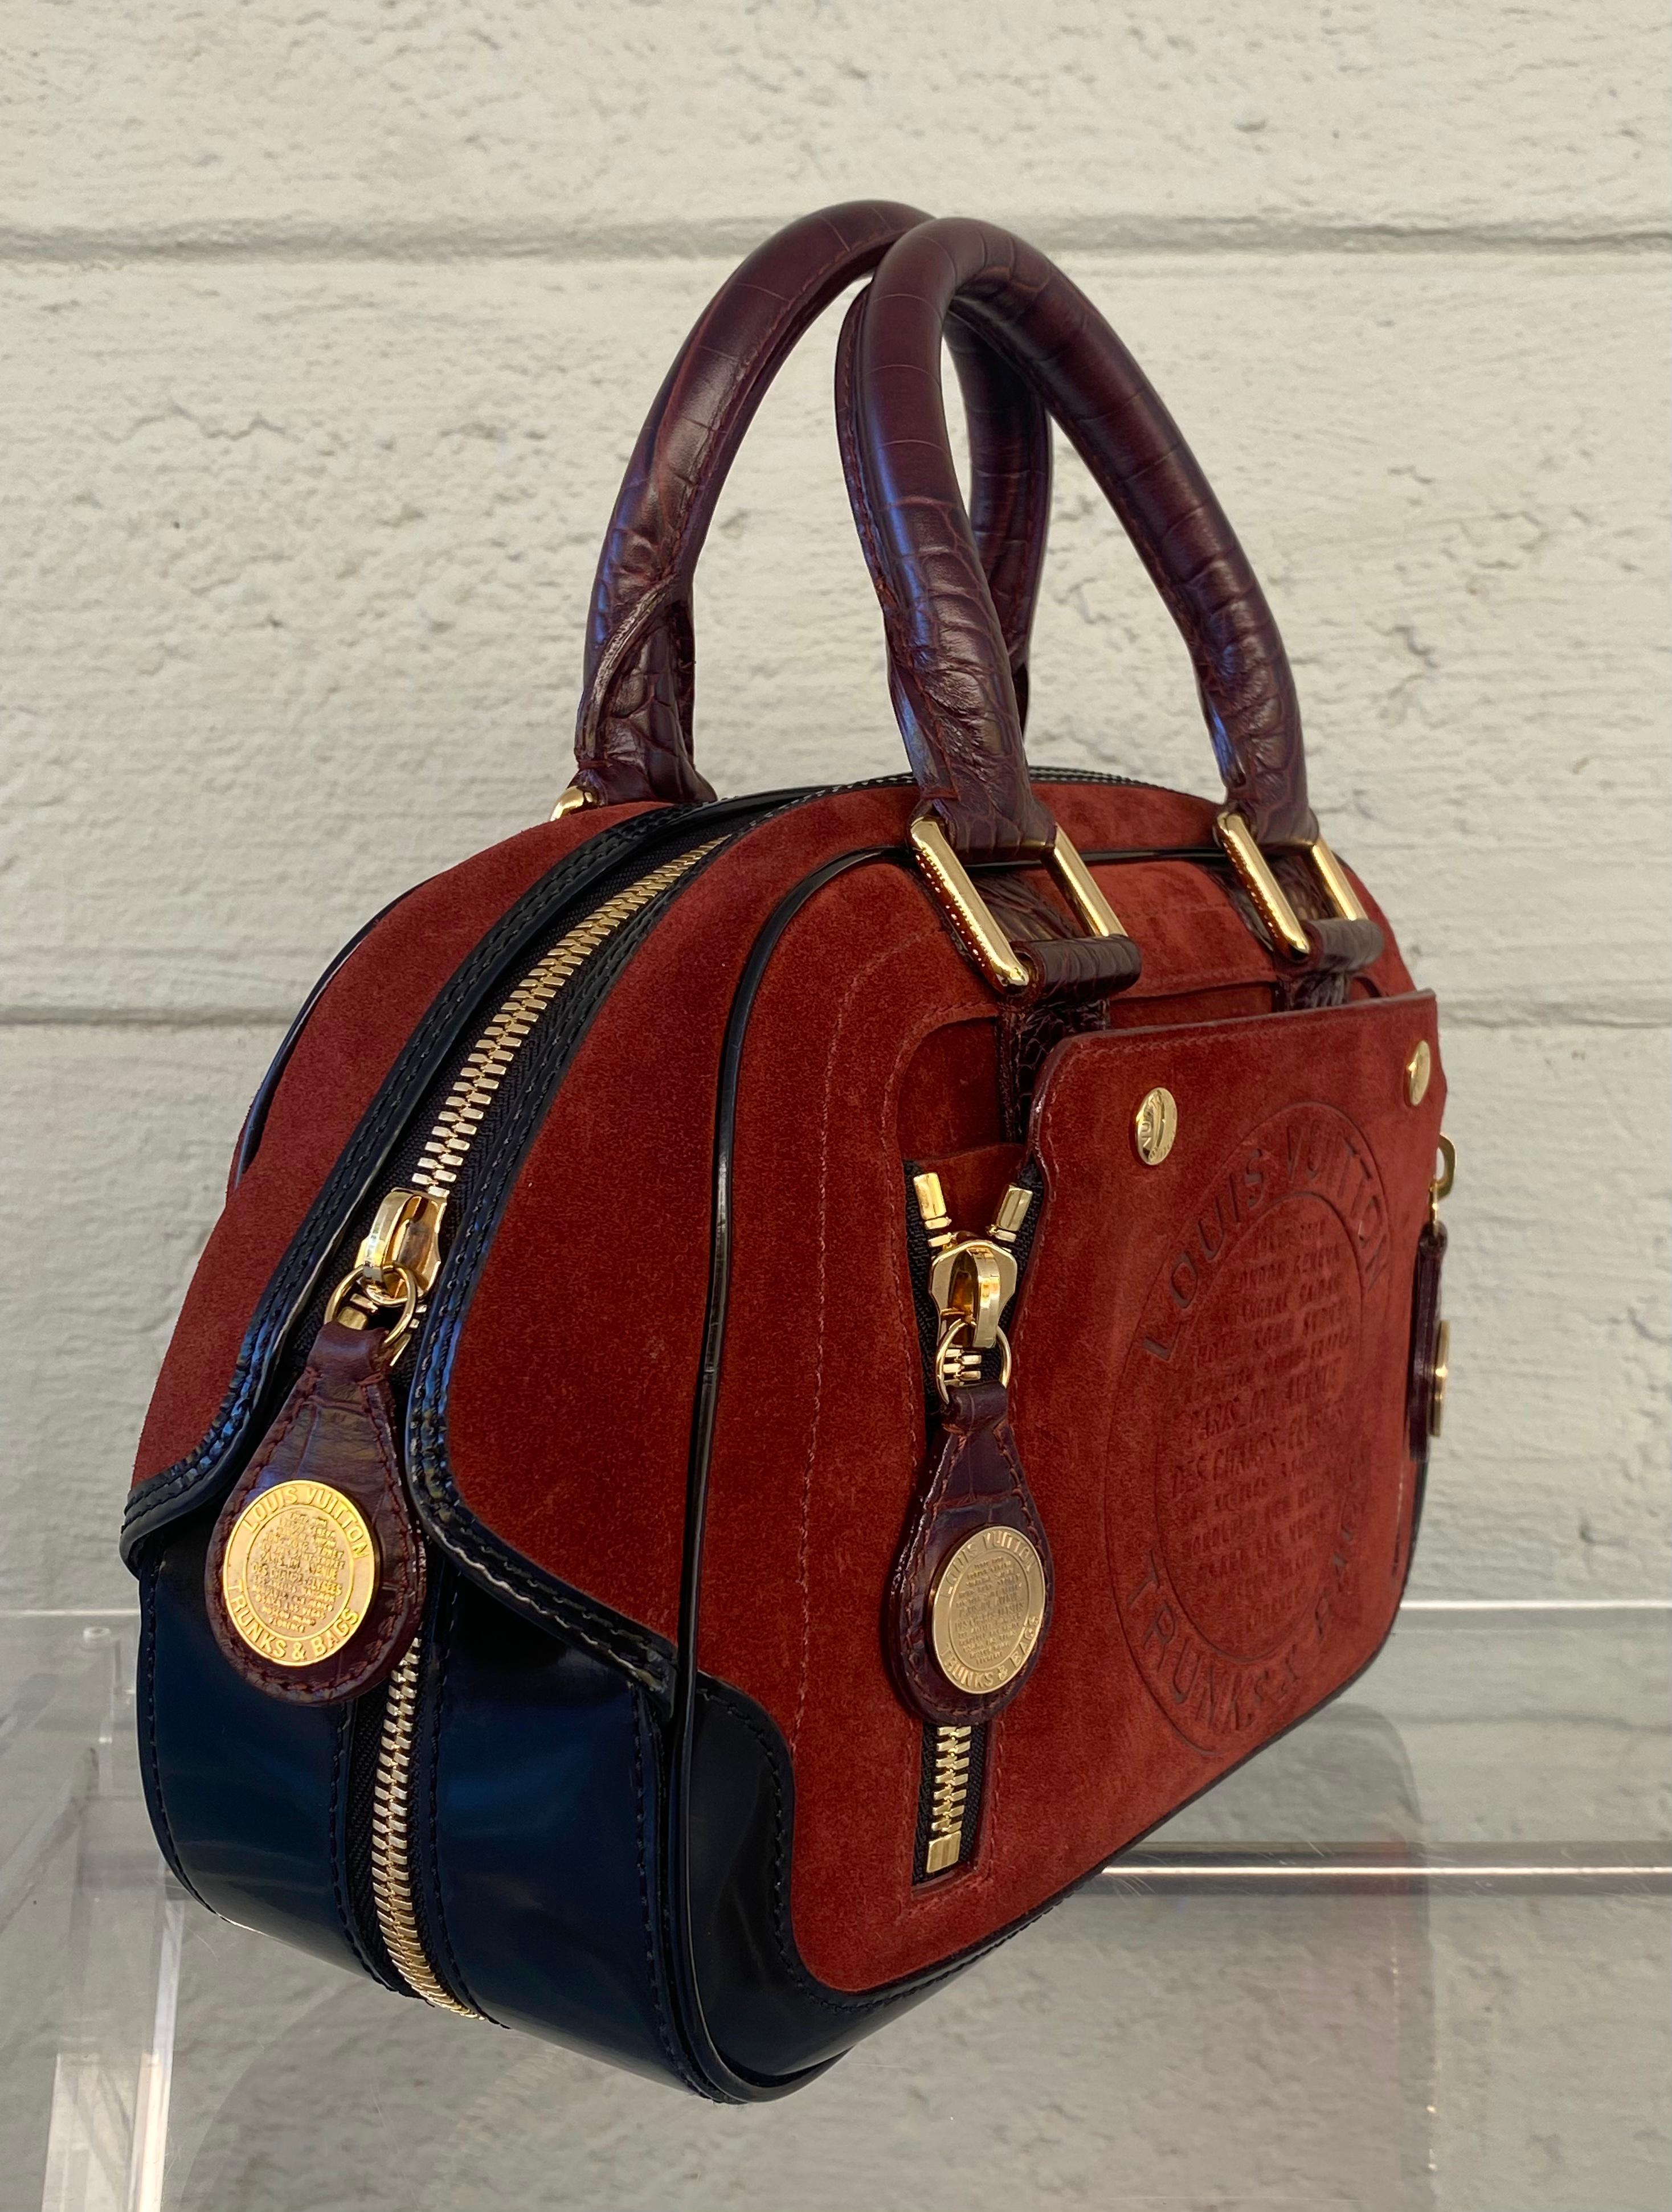 The ultimate in handbag making luxury craftsmanship. The Iconic House of Louis Vuitton always provides us with timeless and classic pieces. This beautiful bag takes timeless creation to a new level of sophistication and charm. Made from the finest